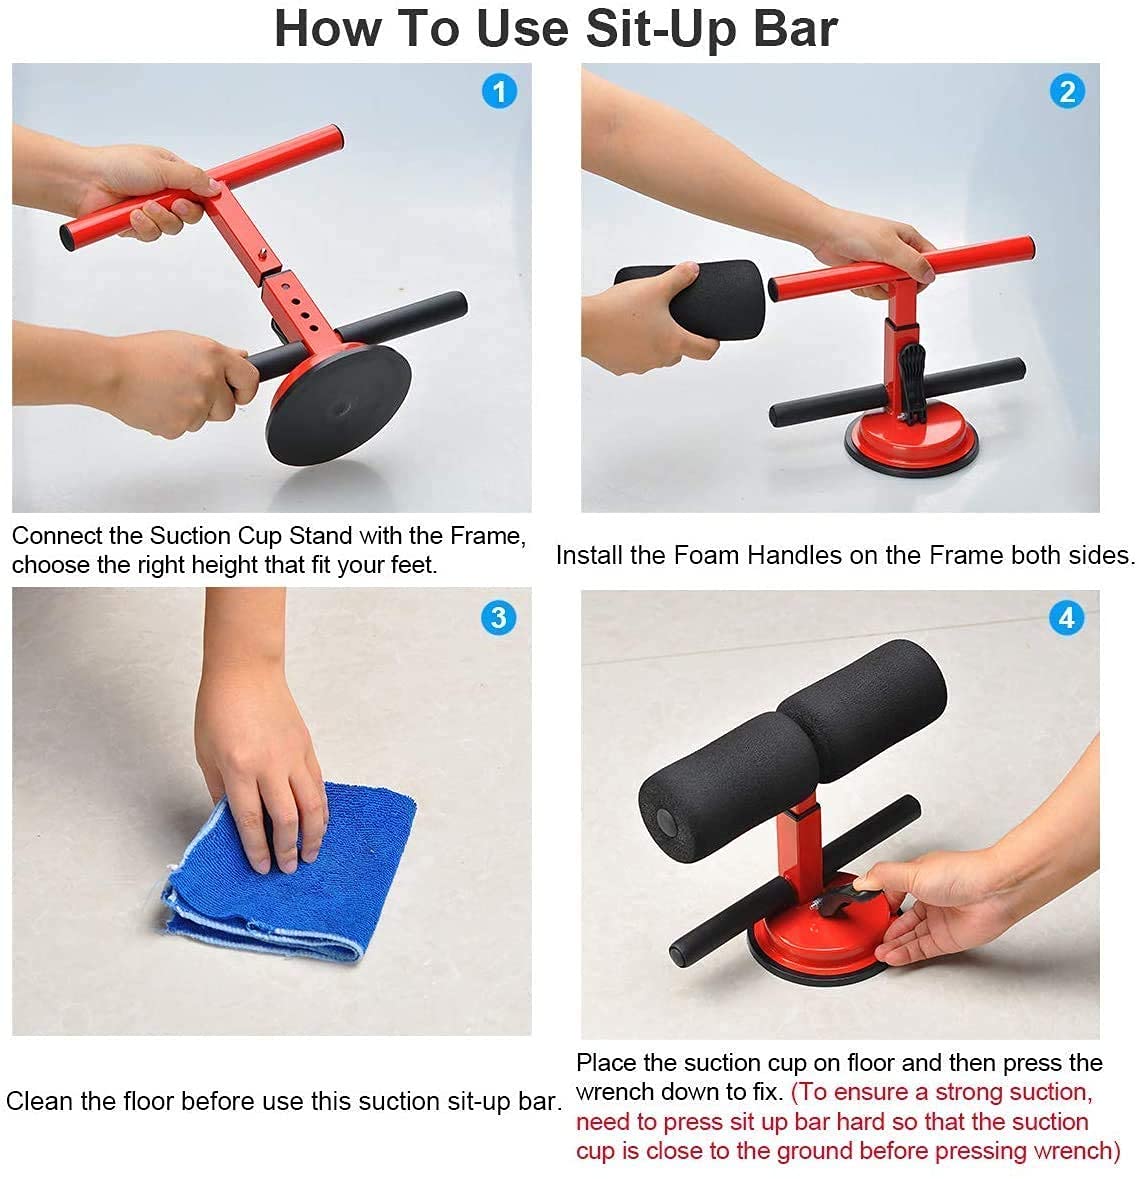 Fitlab's® Sit-Up Bar